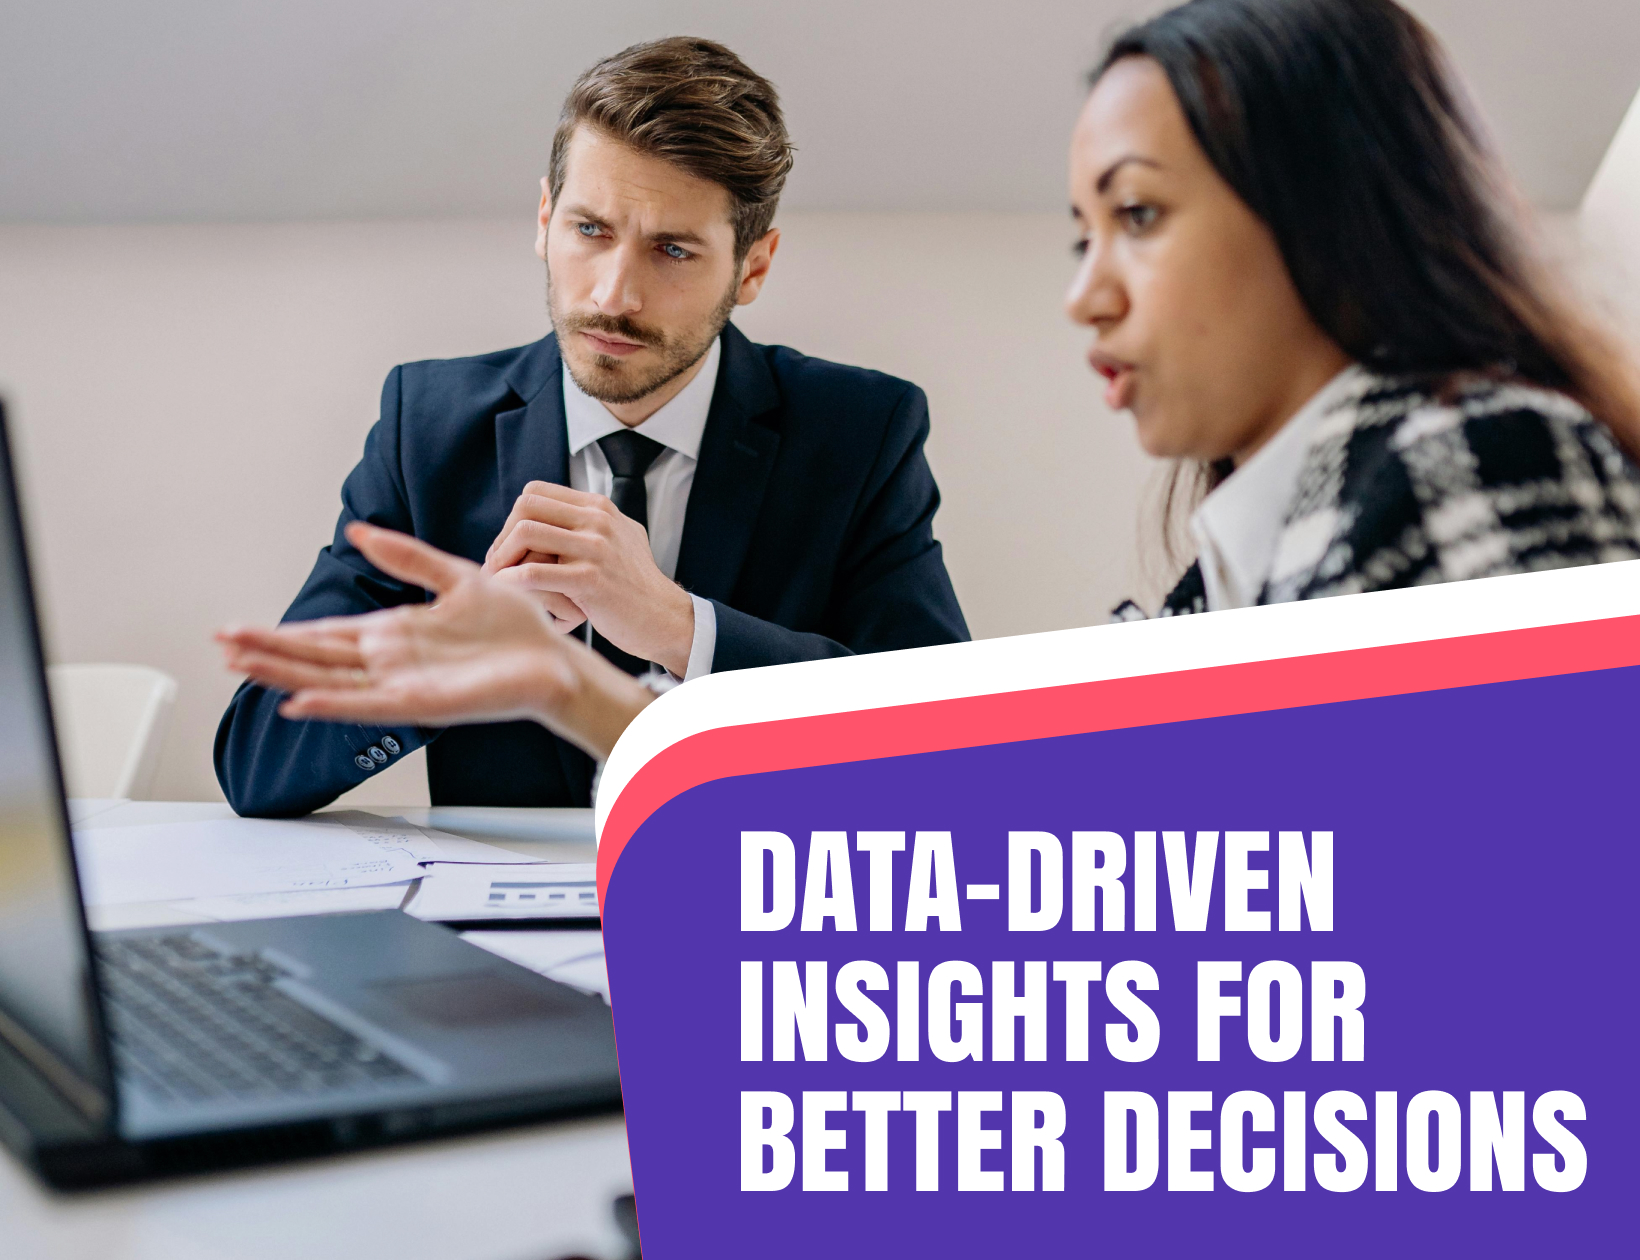 Data-driven insights for better decisions: How a CRM empowers your sales team